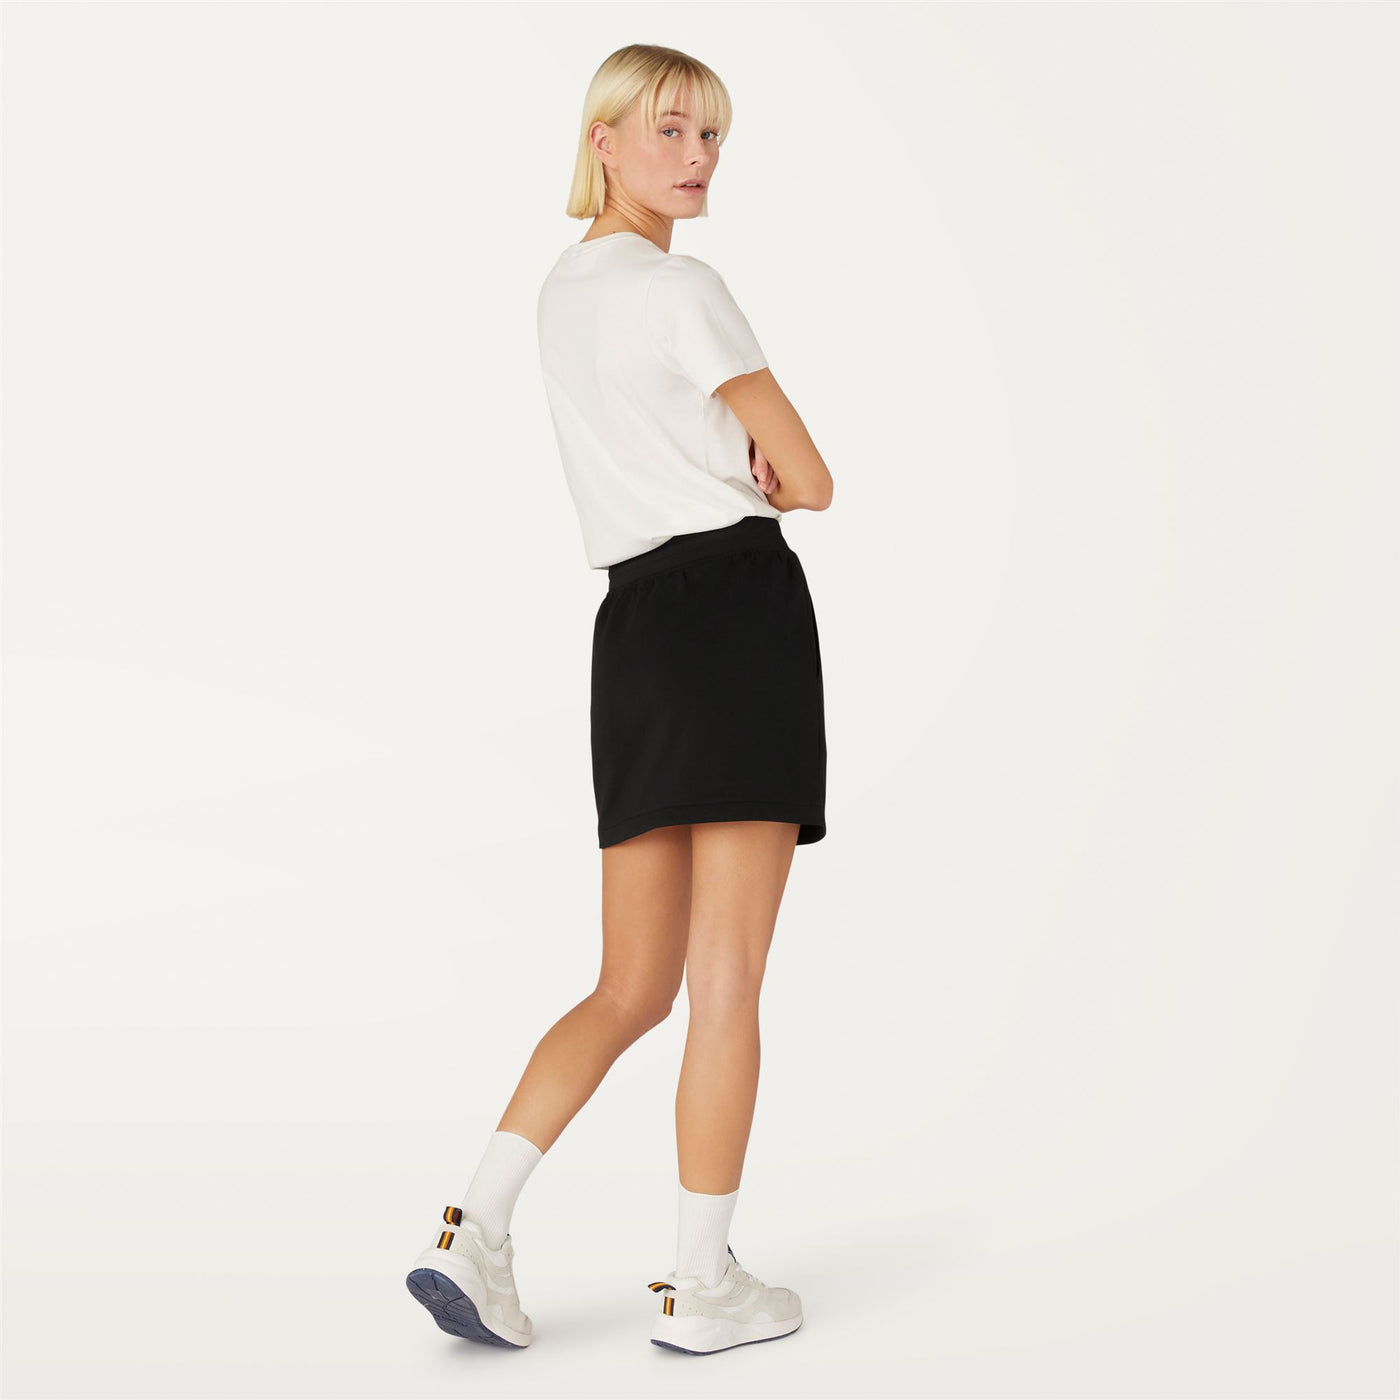 Skirts Woman JOSETTE LIGHT SPACER Short BLACK PURE Dressed Front Double		